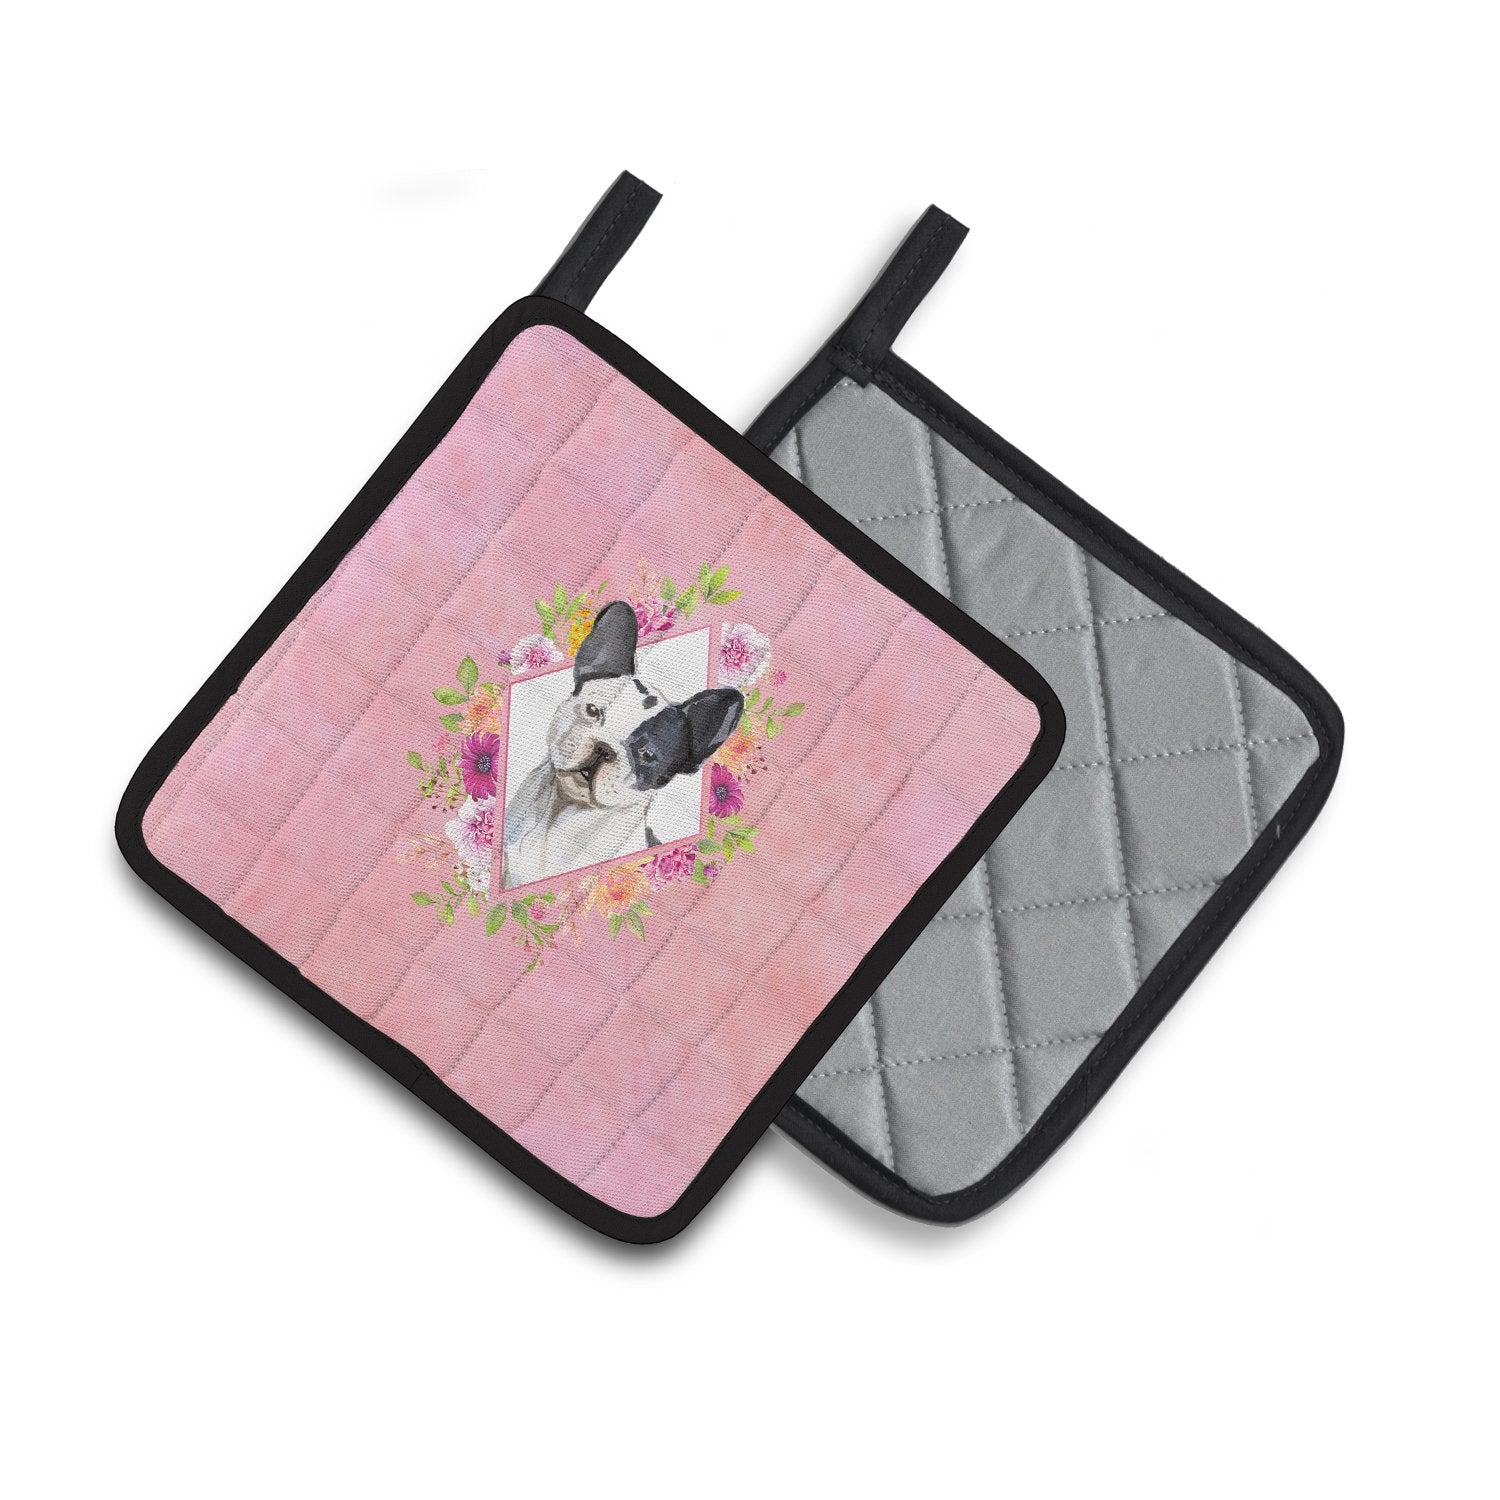 Black and White Frenchie Pink Flowers Pair of Pot Holders CK4260PTHD by Caroline's Treasures